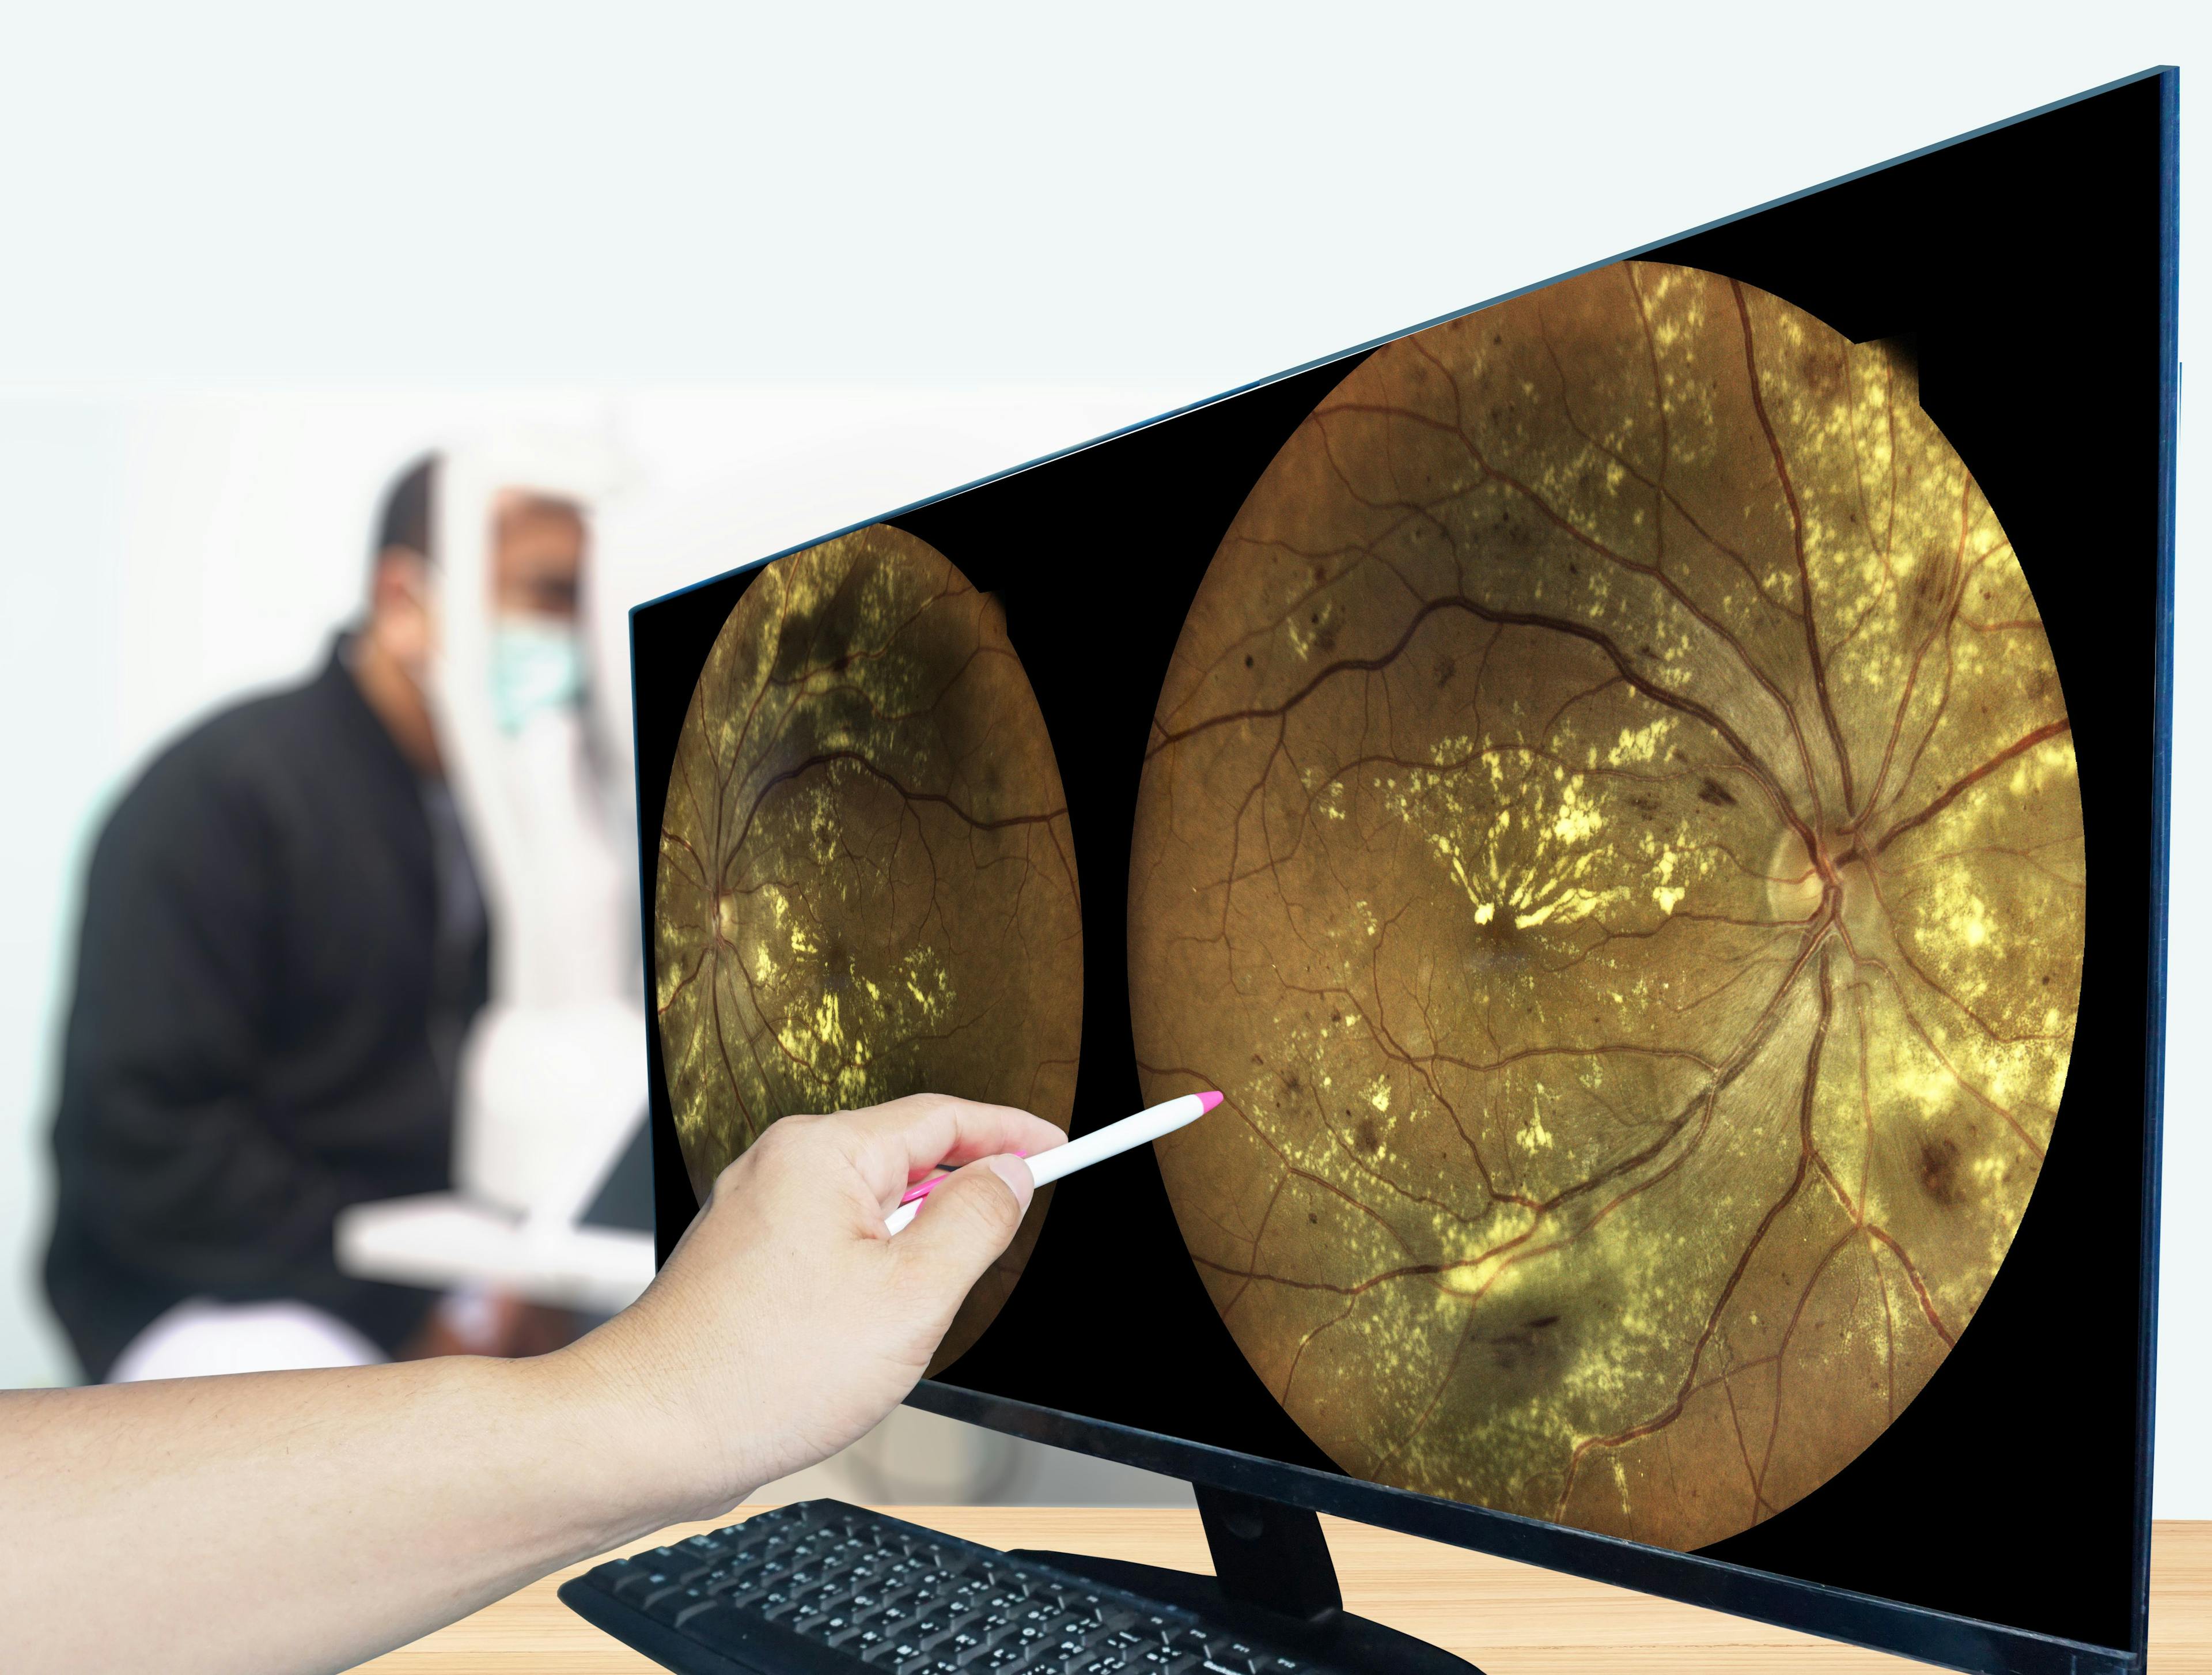 Study: Early anti-VEGF treatment of diabetic retinopathy yields no benefit to visual acuity